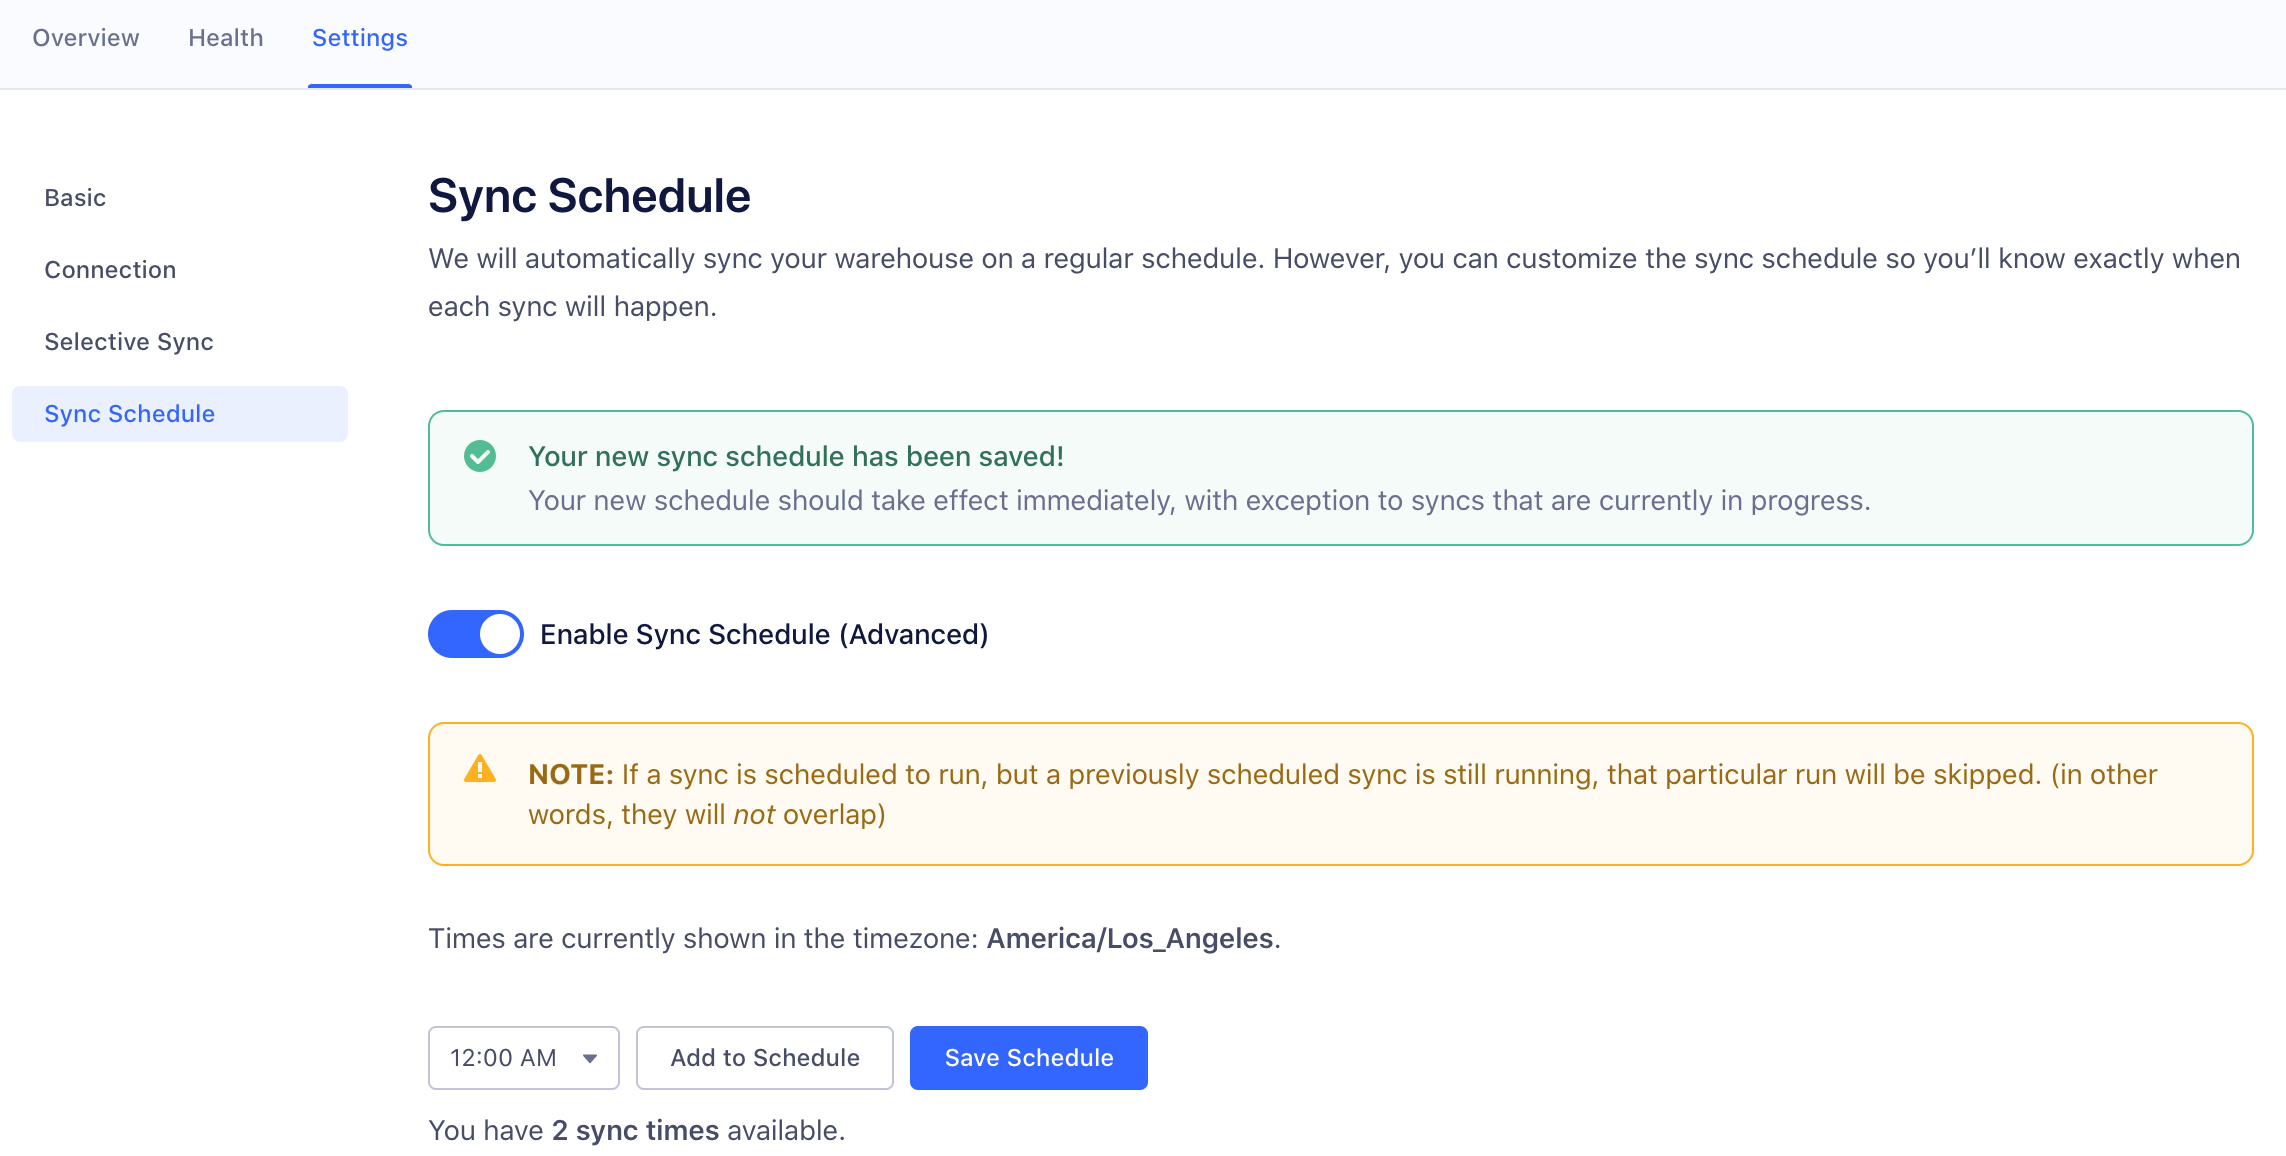 A screenshot of the sync schedule page. The enable sync schedule is toggled on, and the sync schedule dropdowns are visible.